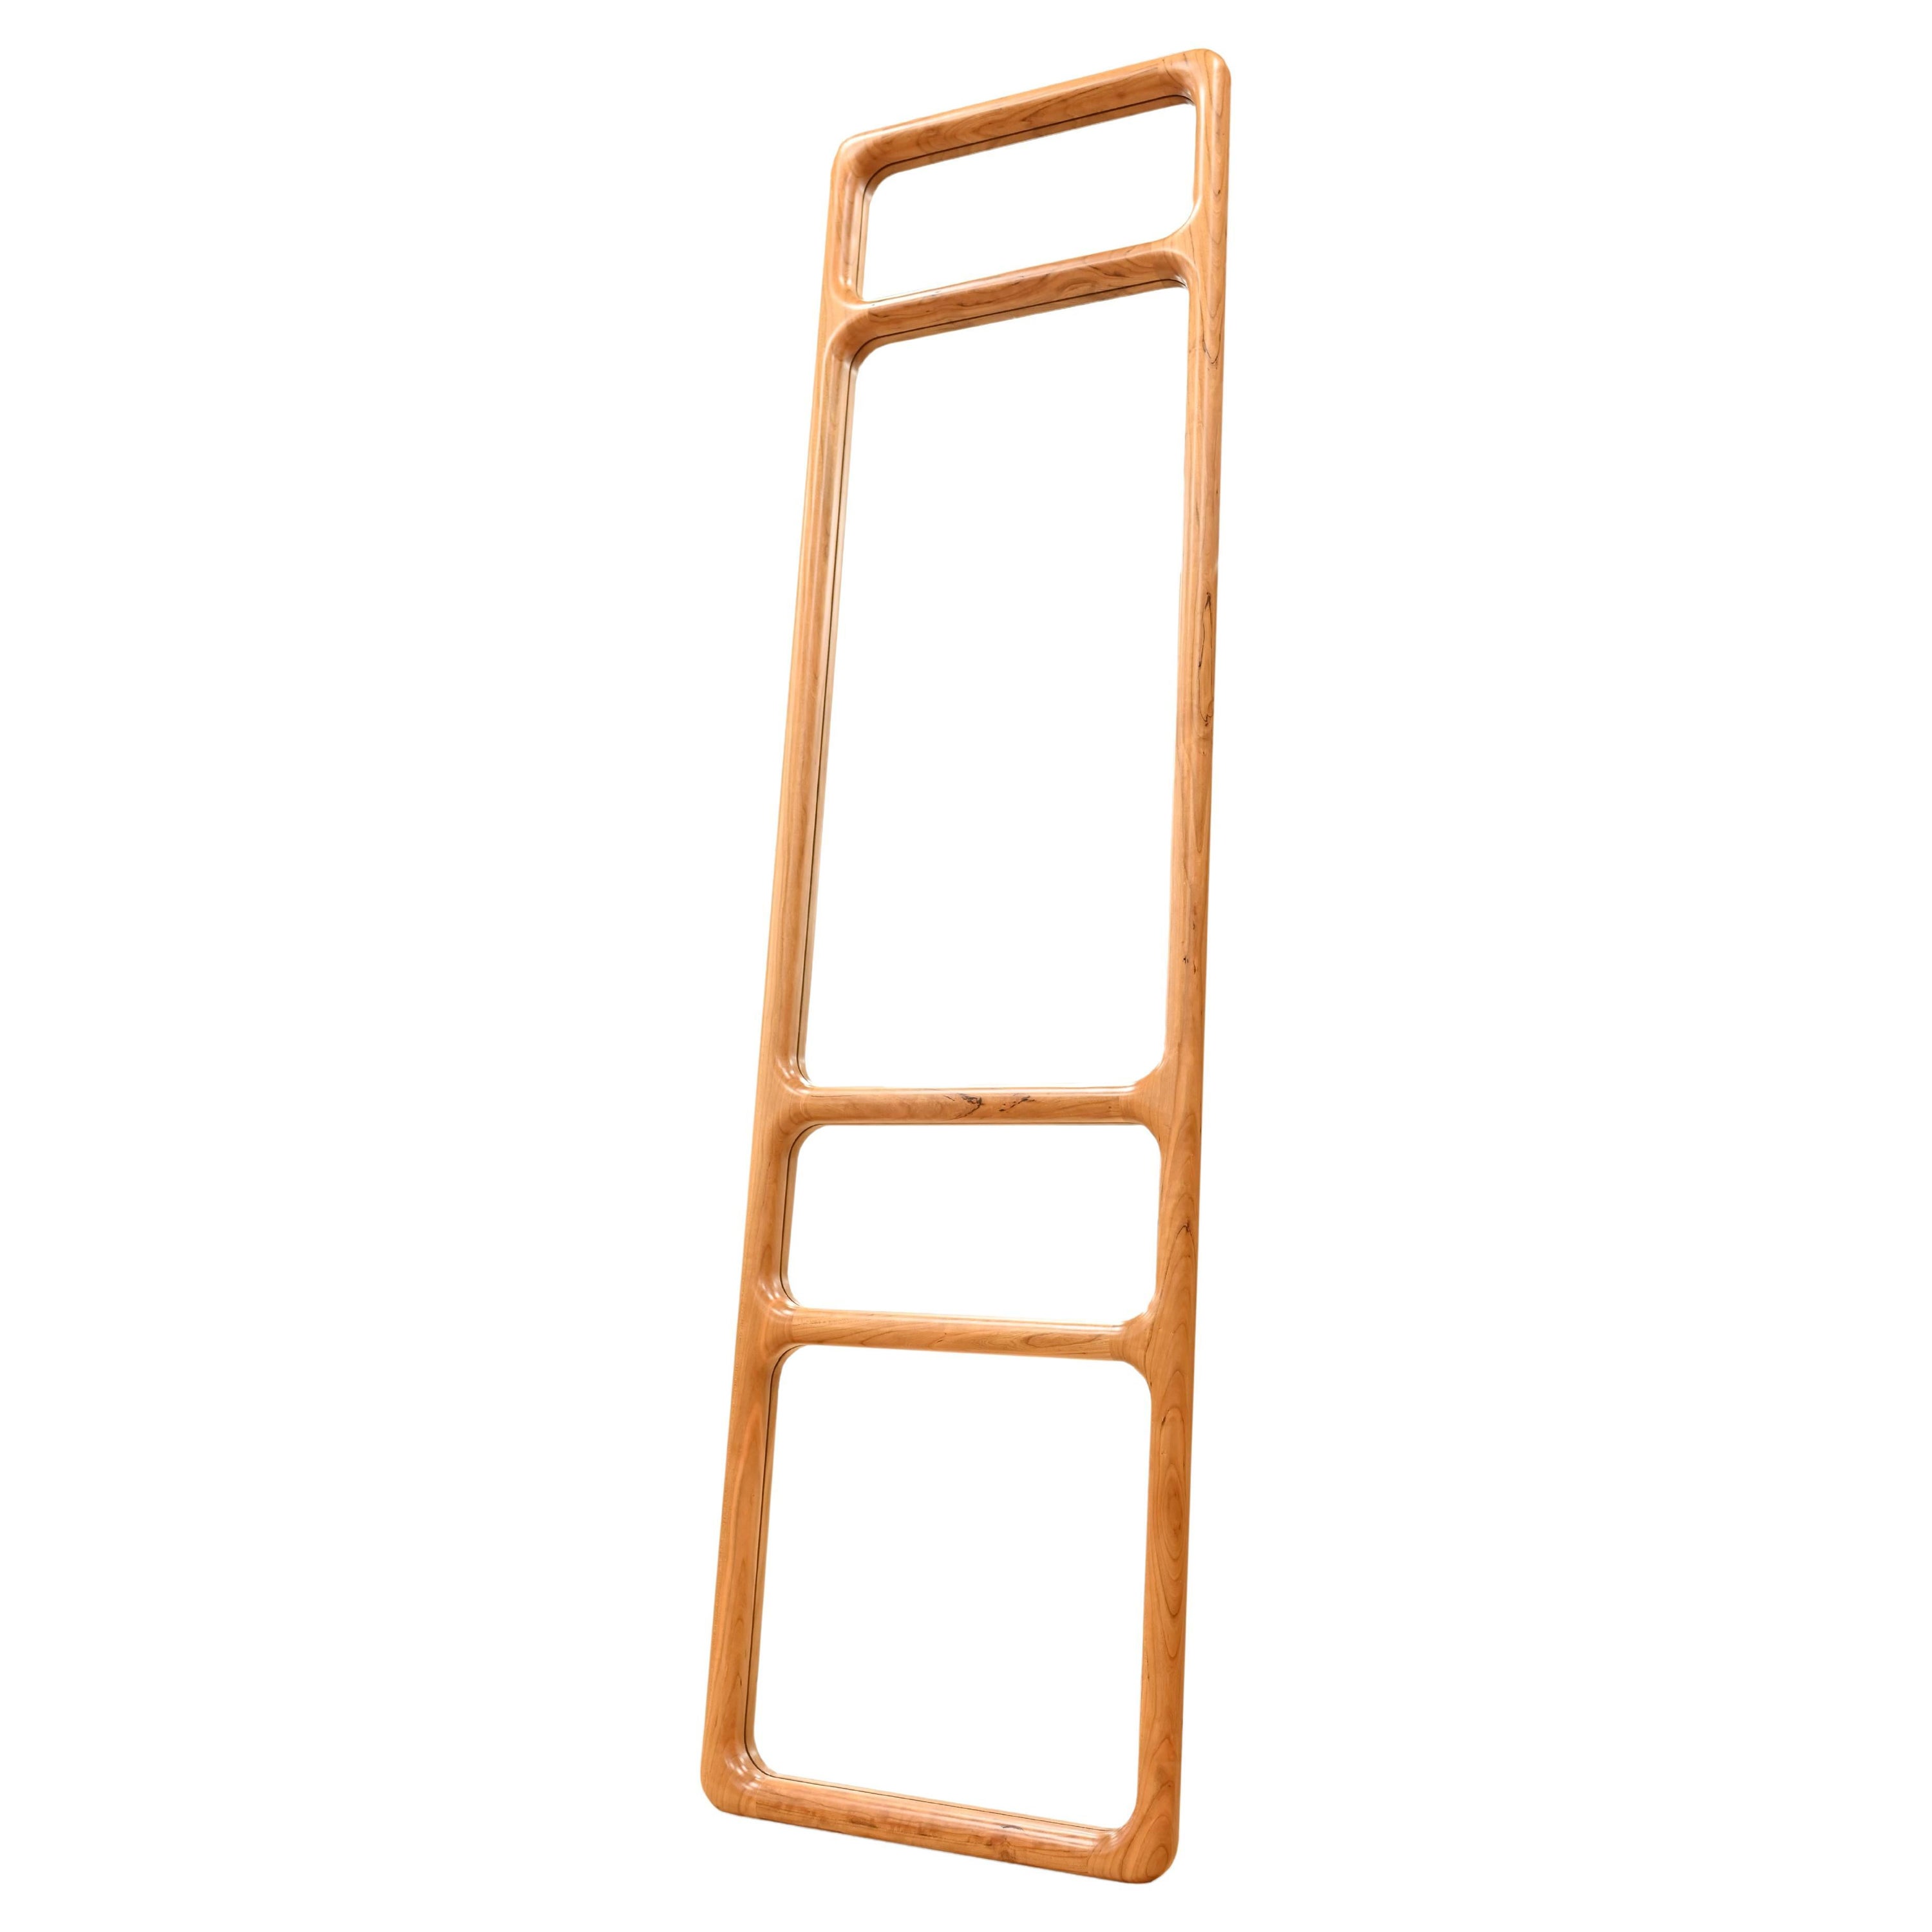 Modern Wood Full-Length Mirror, Handcrafted from Cherry Wood